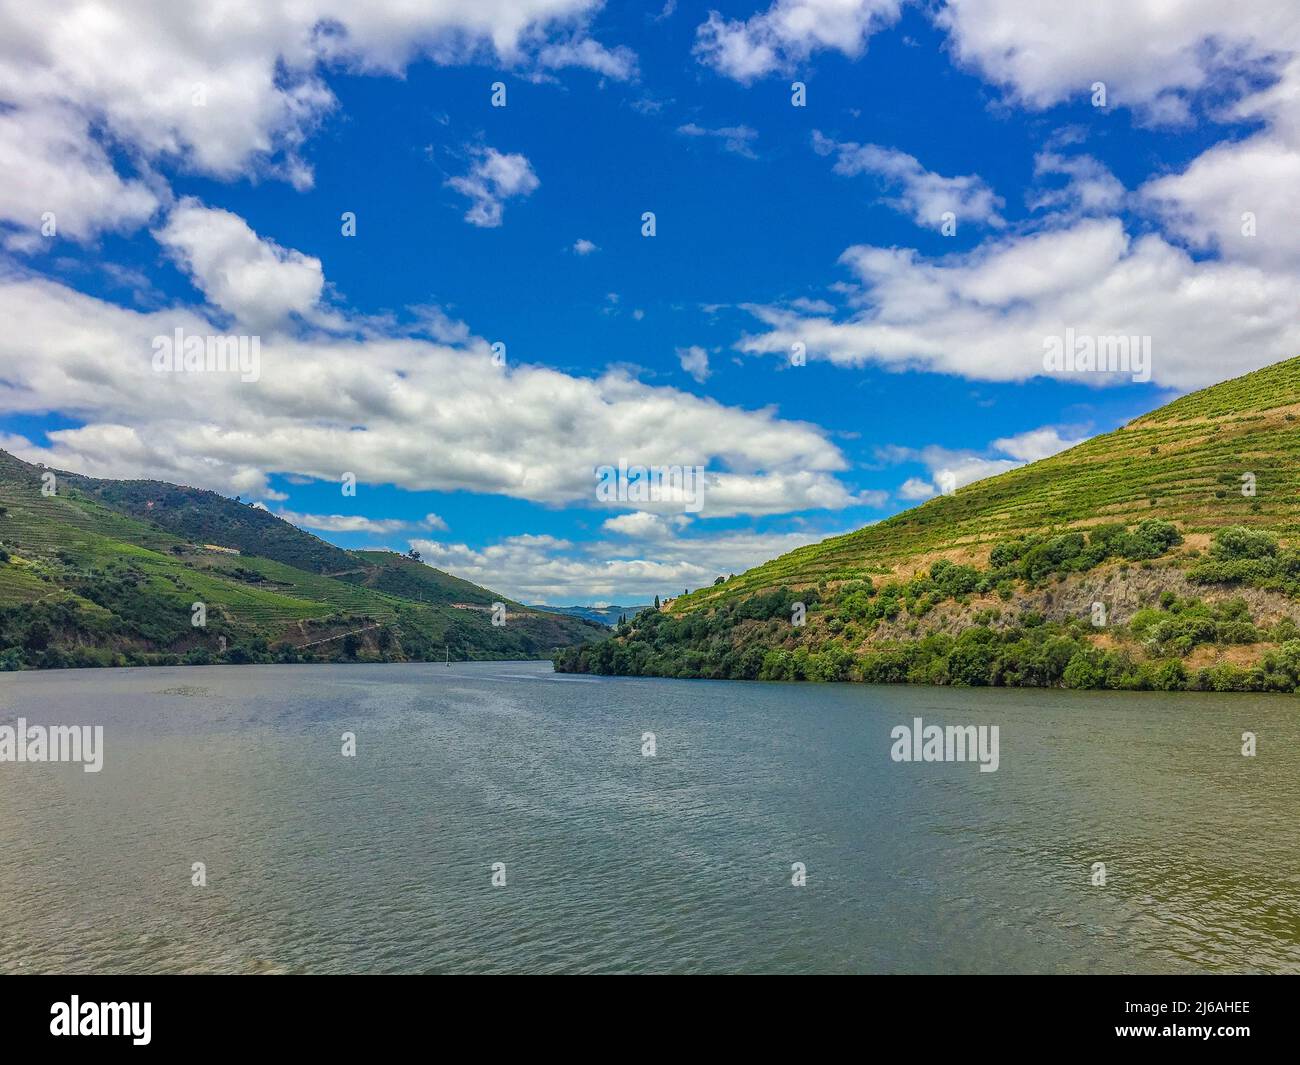 View over the Douro Region Landscape, With the Douro River. Douro Valley, Portugal Stock Photo